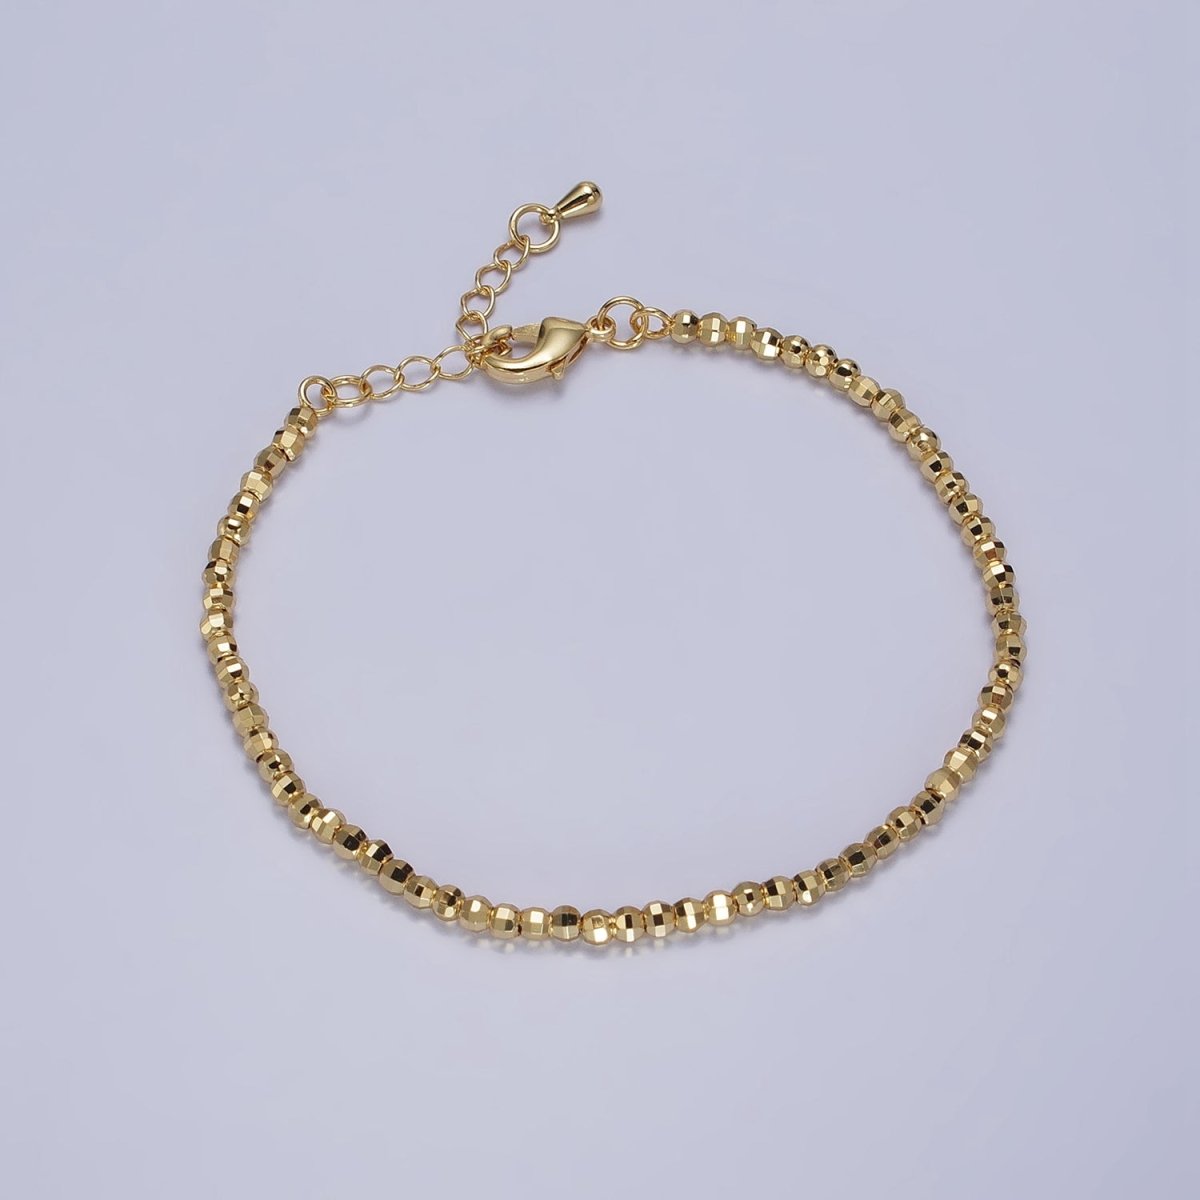 2.5mm, 3.5mm Gold, Silver Multifaceted Disco Ball Round Bead 7 Inch Chain Bracelet | WA-1572 - WA-1575 Clearance Pricing - DLUXCA